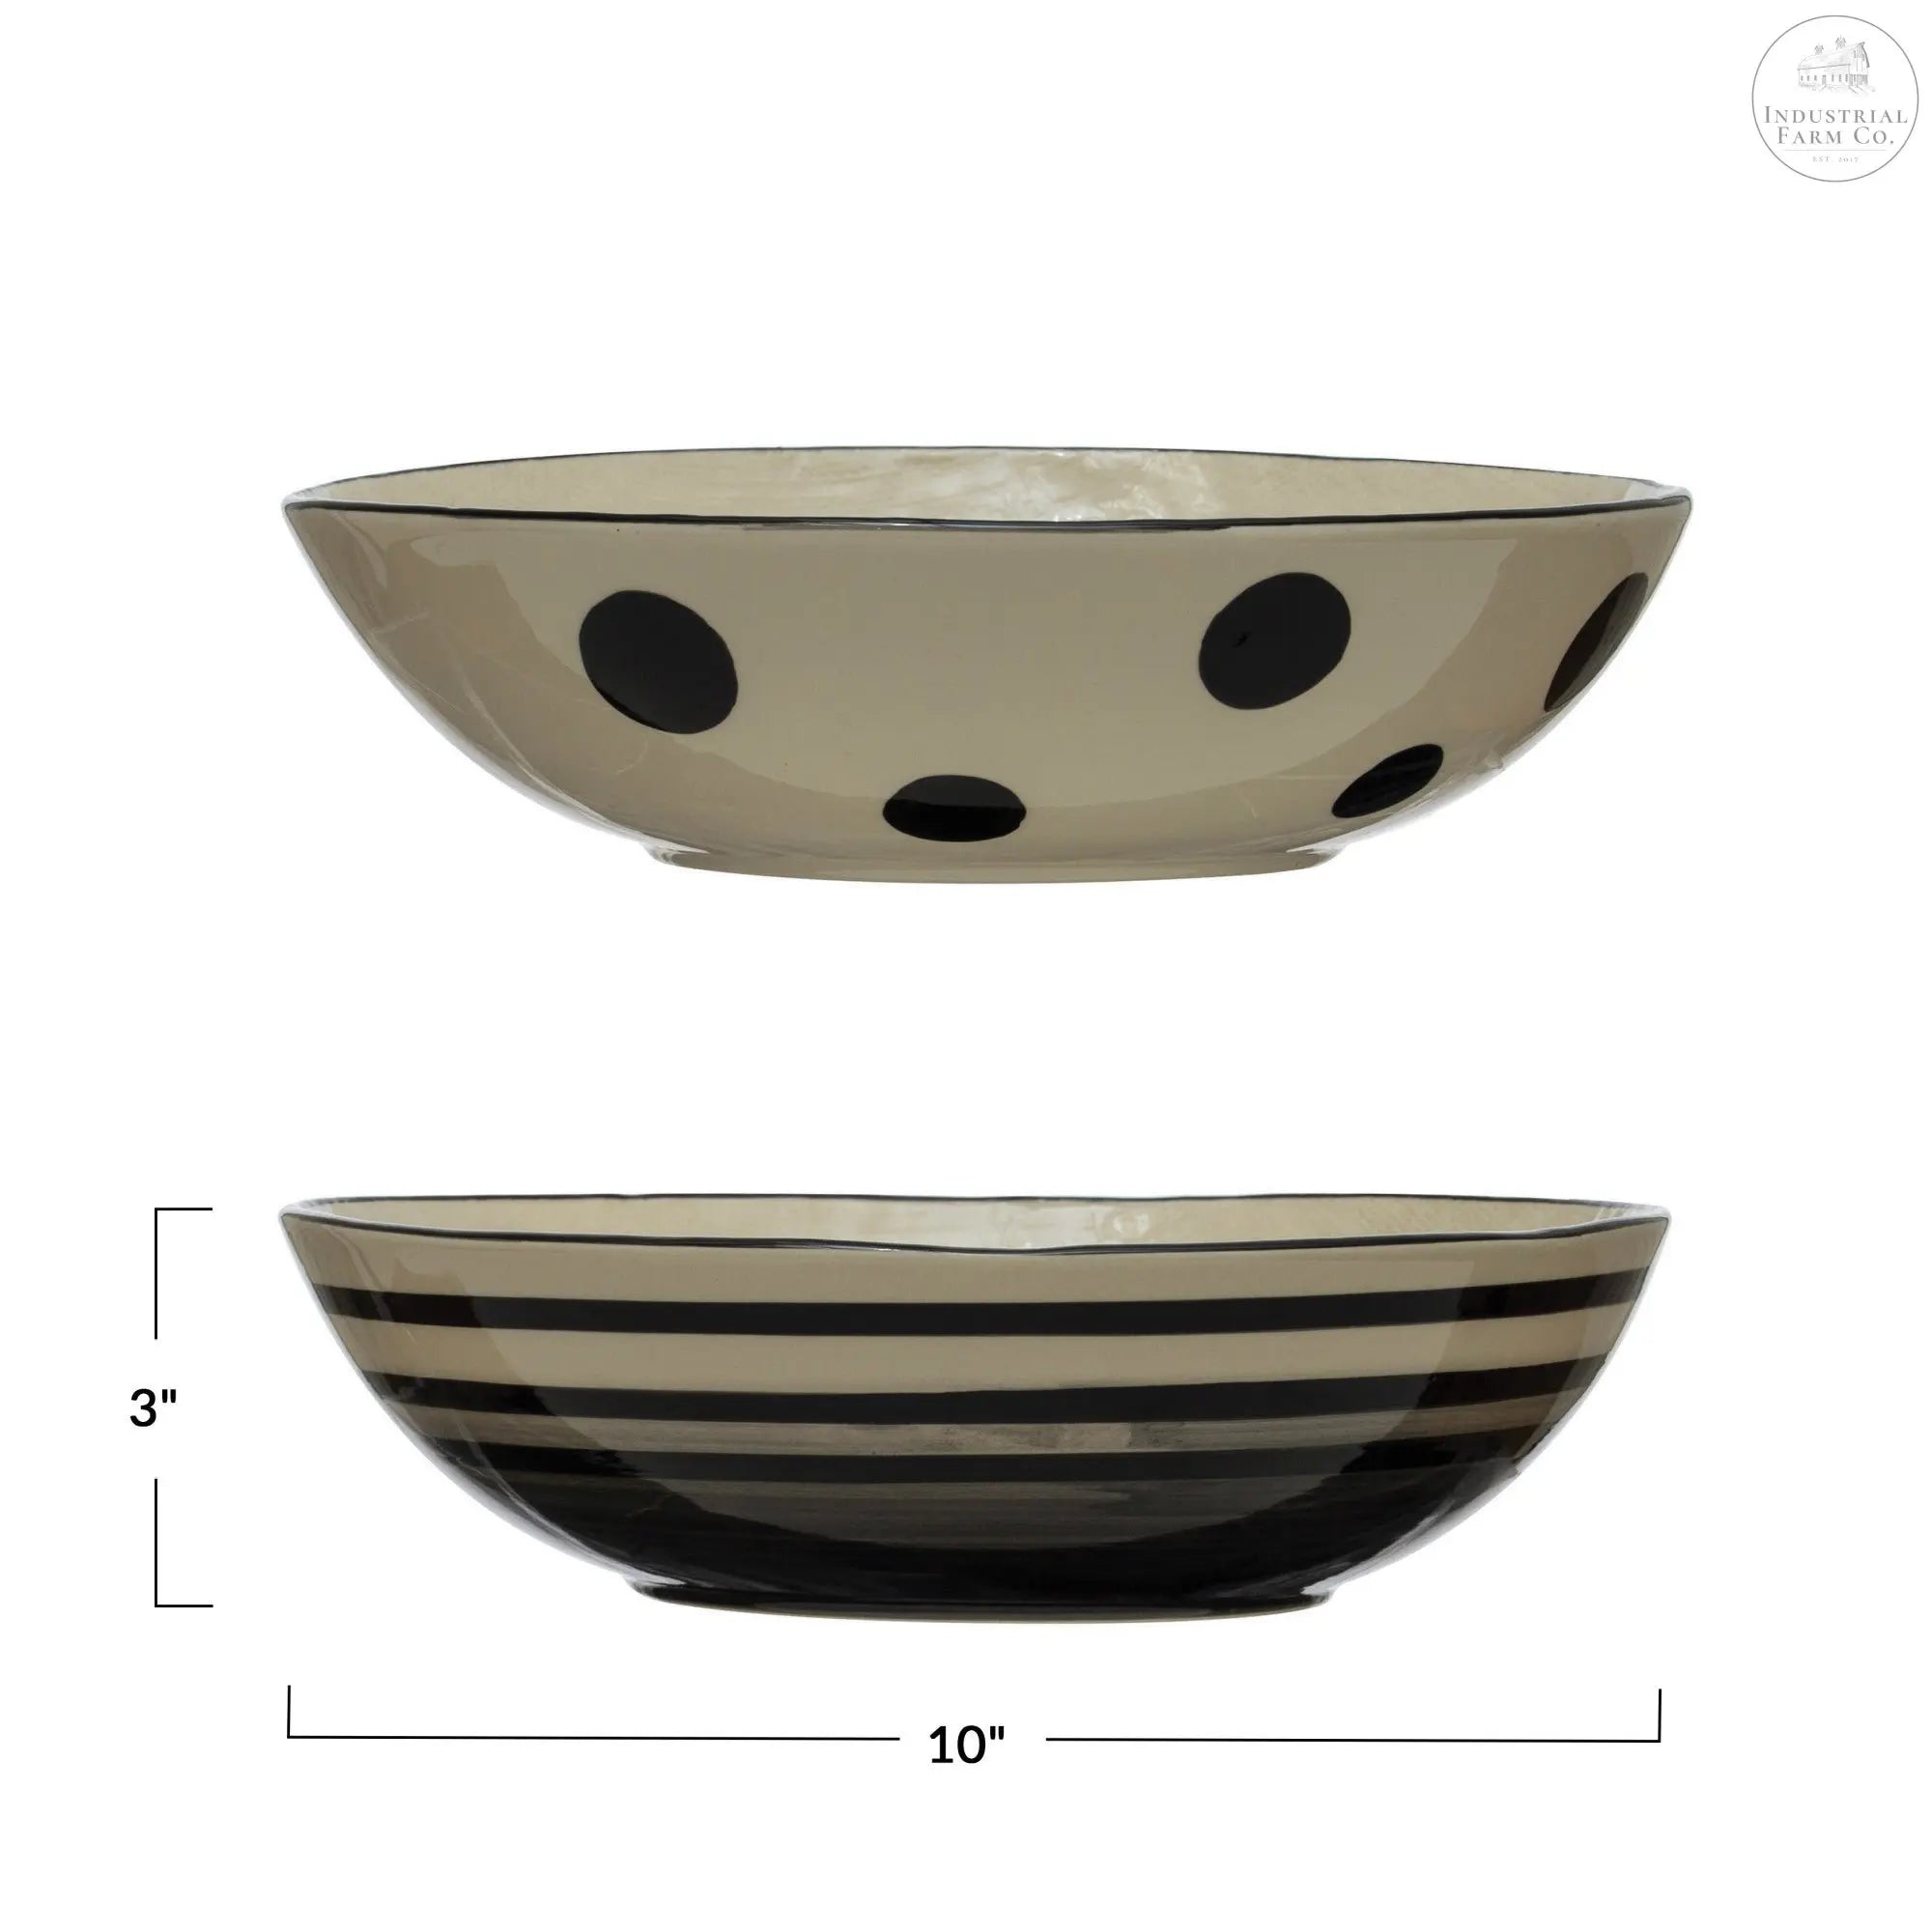 The Walker Hand Painted Serving Bowl  Dots   | Industrial Farm Co